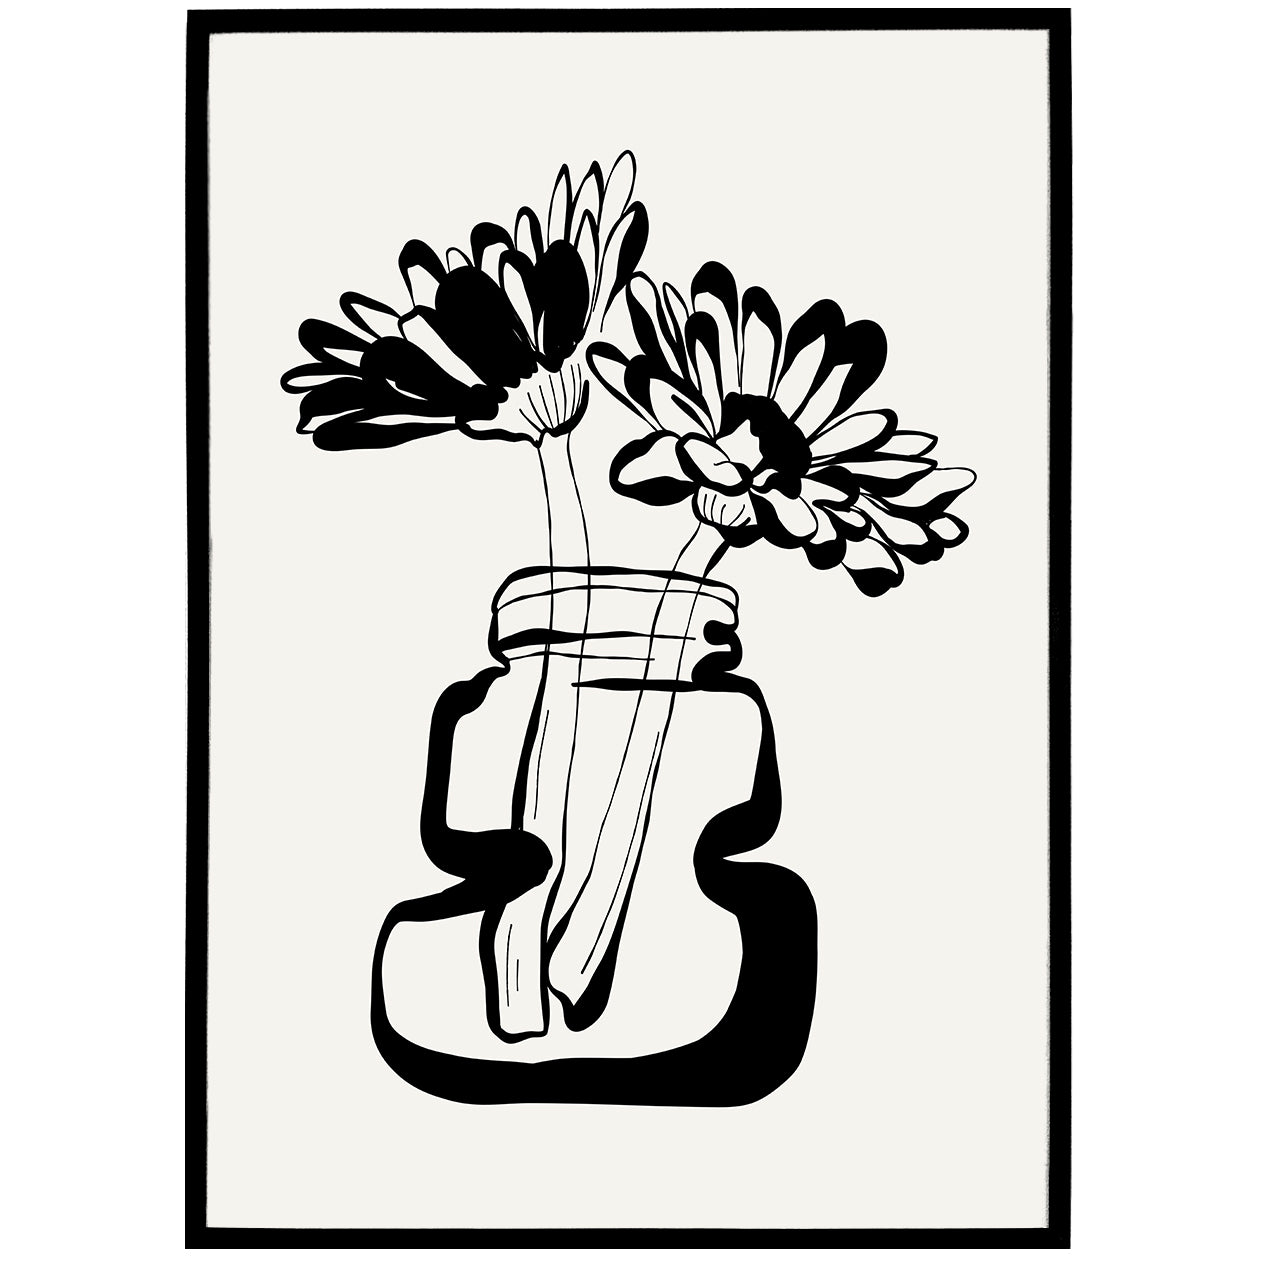 Handdrawn Retro Ceramic with Flowers Poster